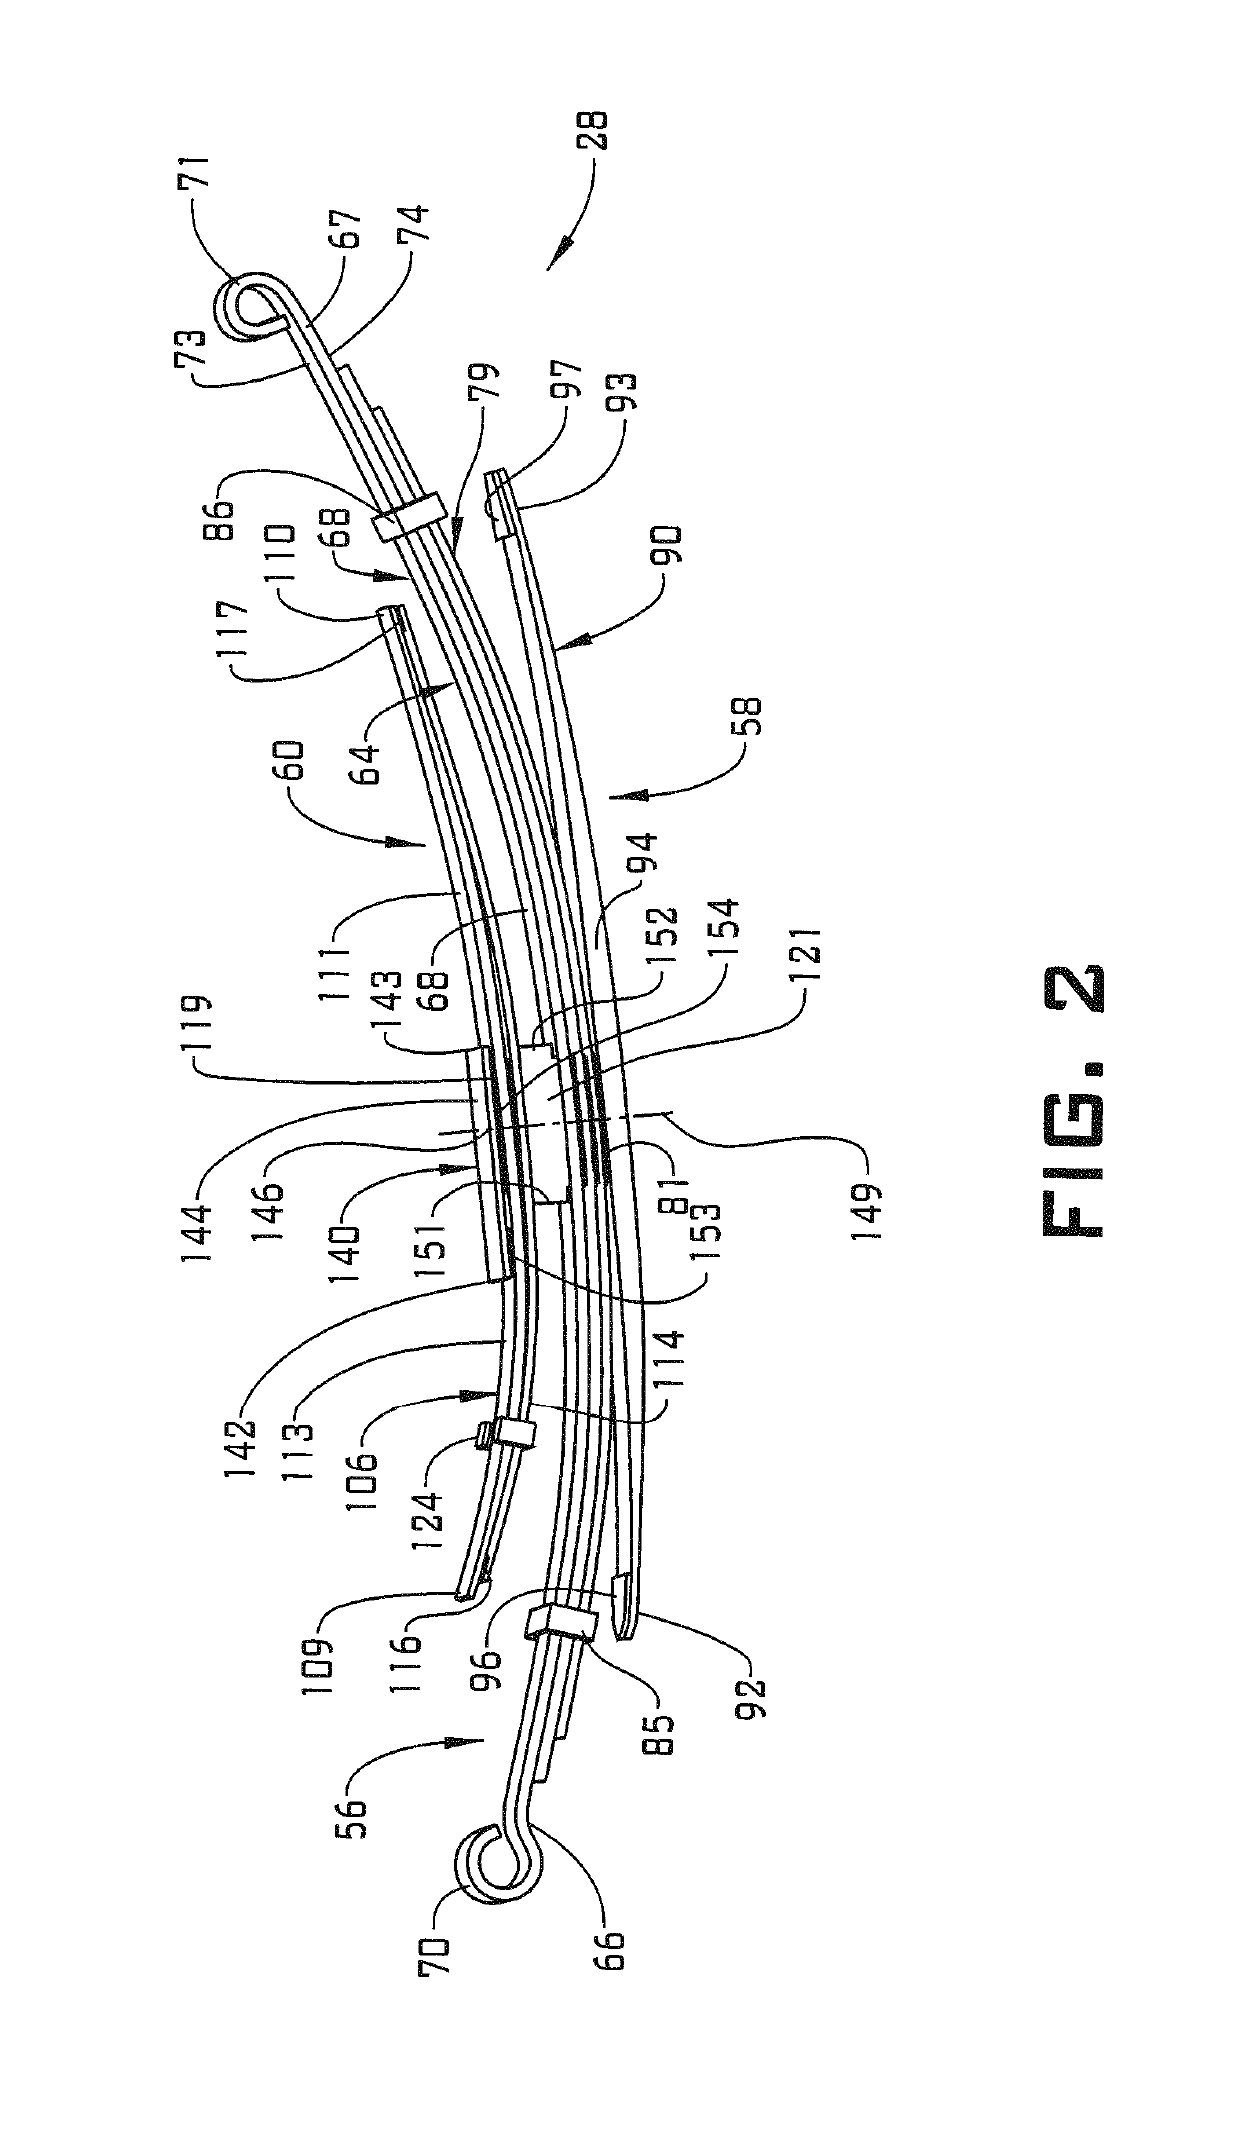 Reinforcement plate for an auxiliary state leaf pack of a leaf spring system